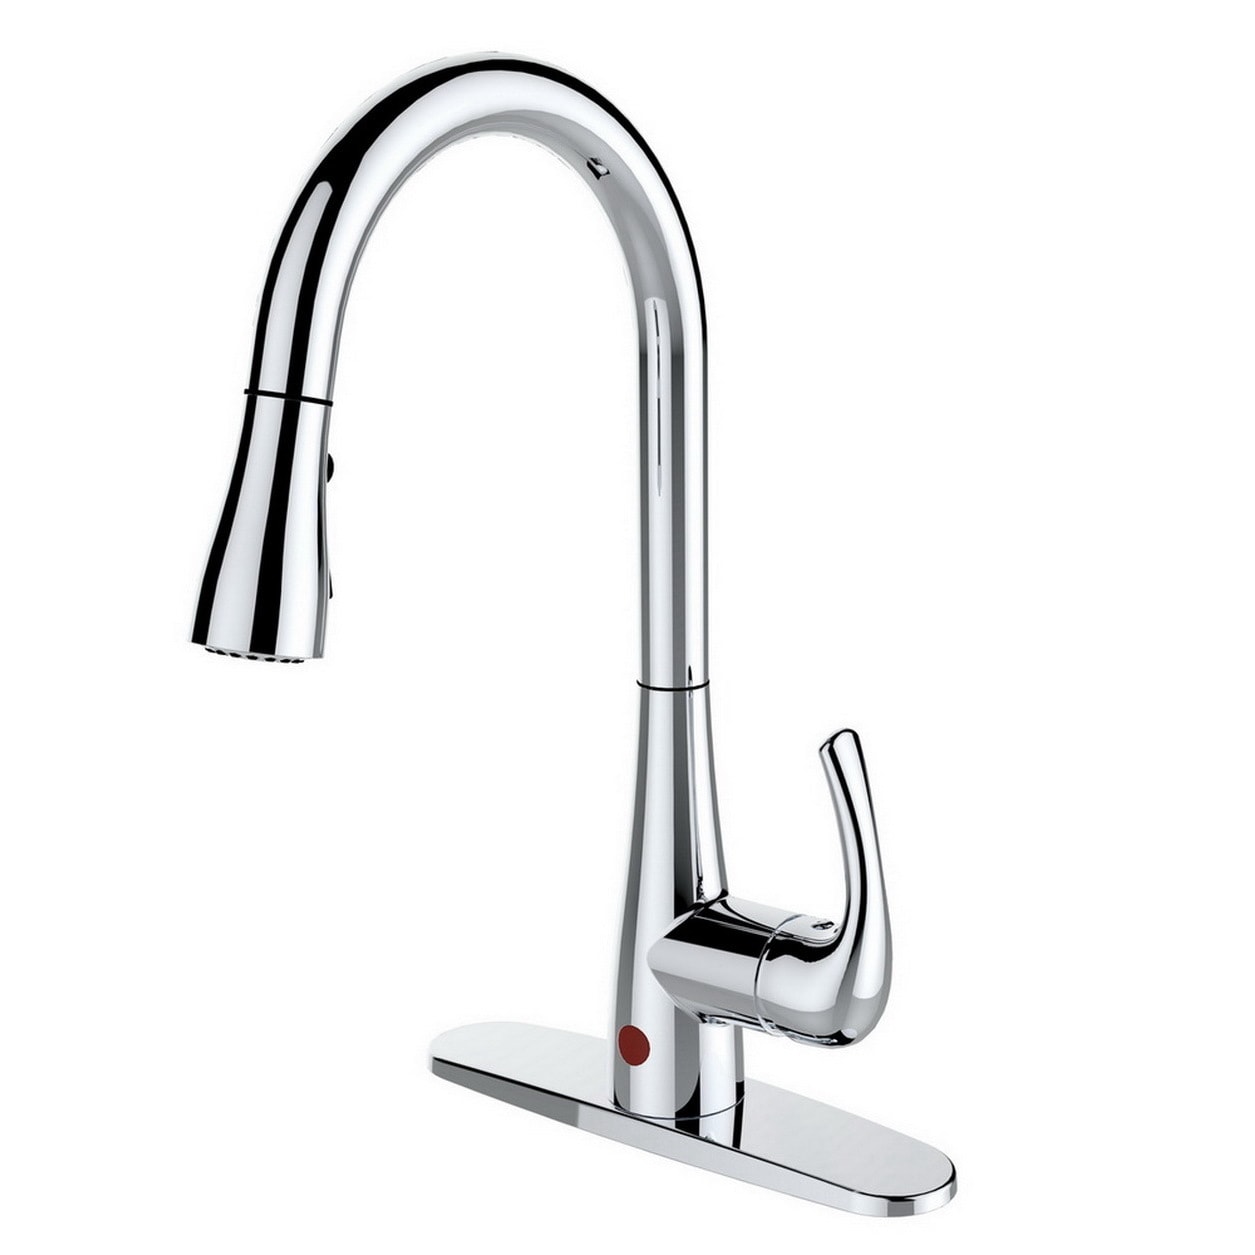 RUNFINE Single-Handle Pull-Down Sprayer With Hands-Free Kitchen Faucet Chrome - image 3 of 5